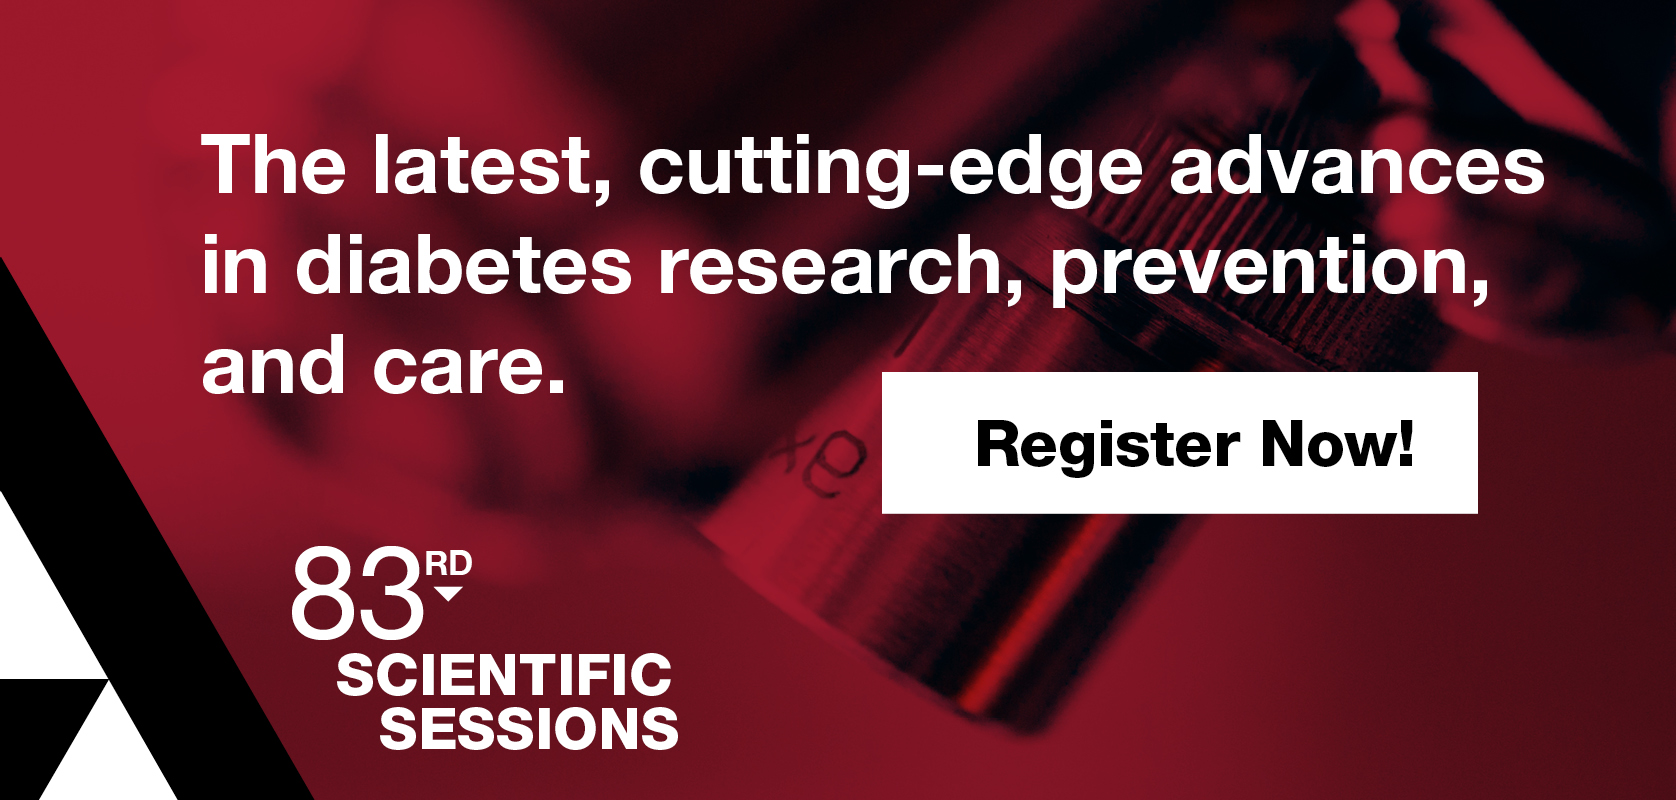 The latest, cutting-edge advances in diabetes research, prevention, and care. Register Now!